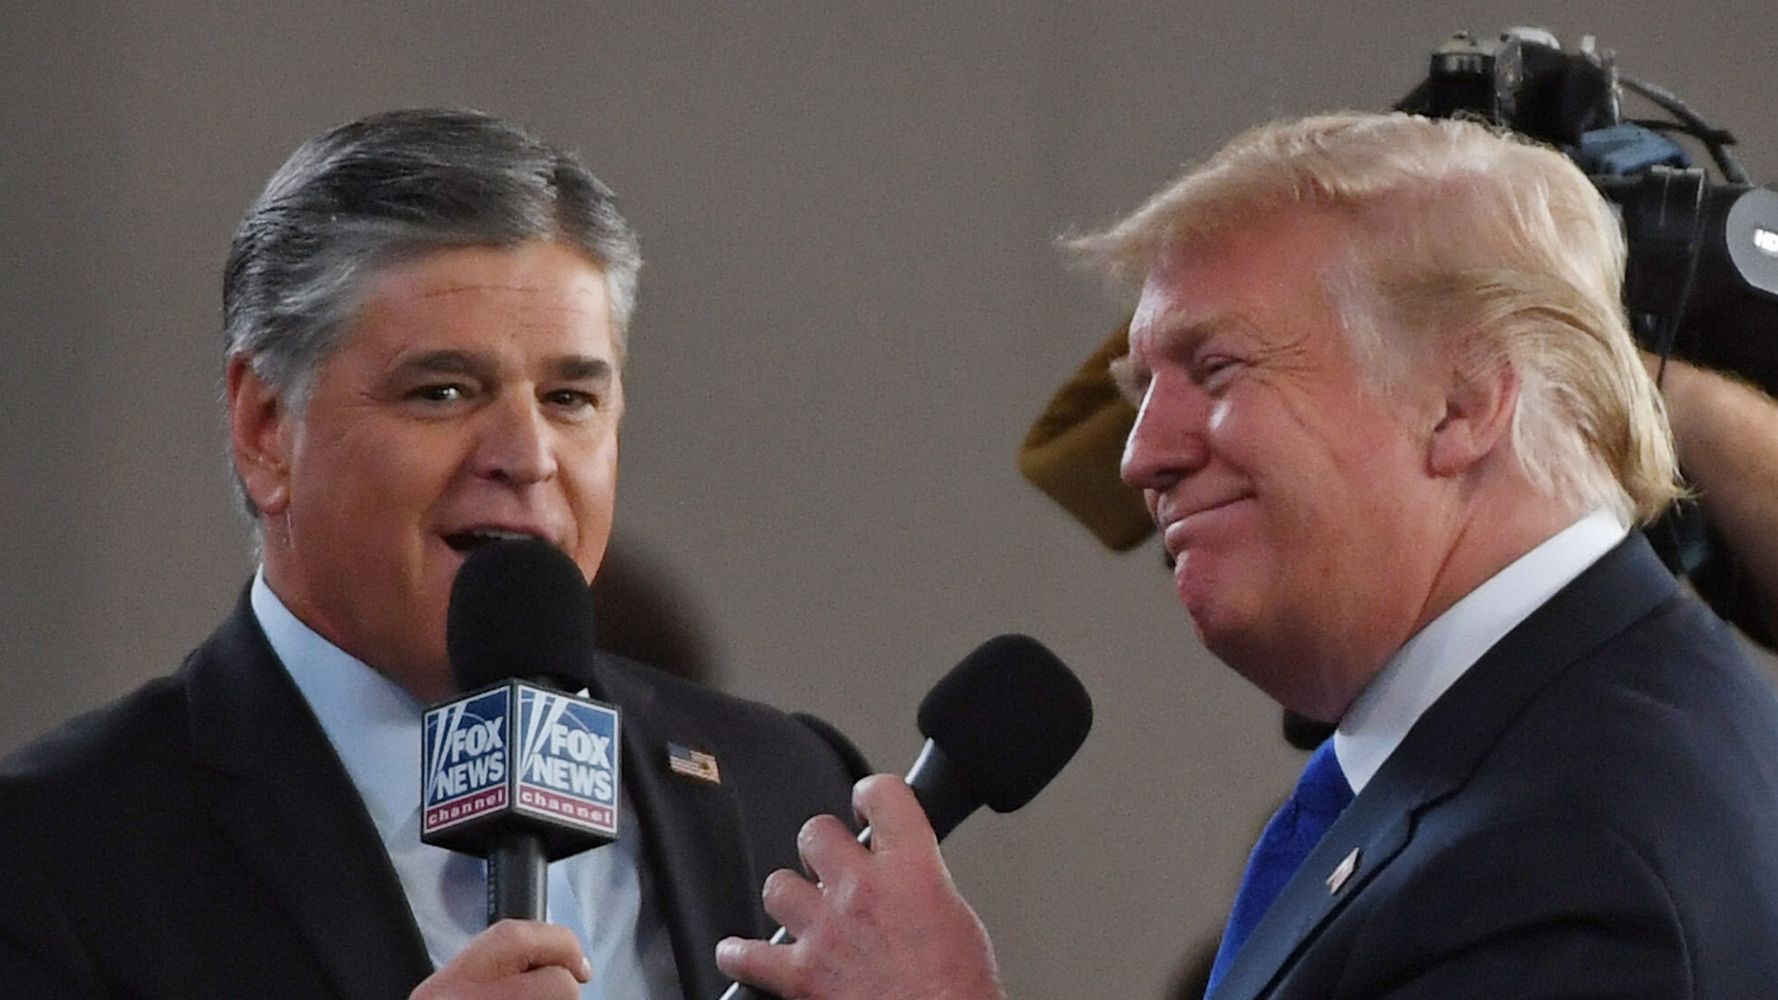 Sean Hannity Slammed 'Lunatic' Trump Backers Even As He Did White House Bidding: Texts